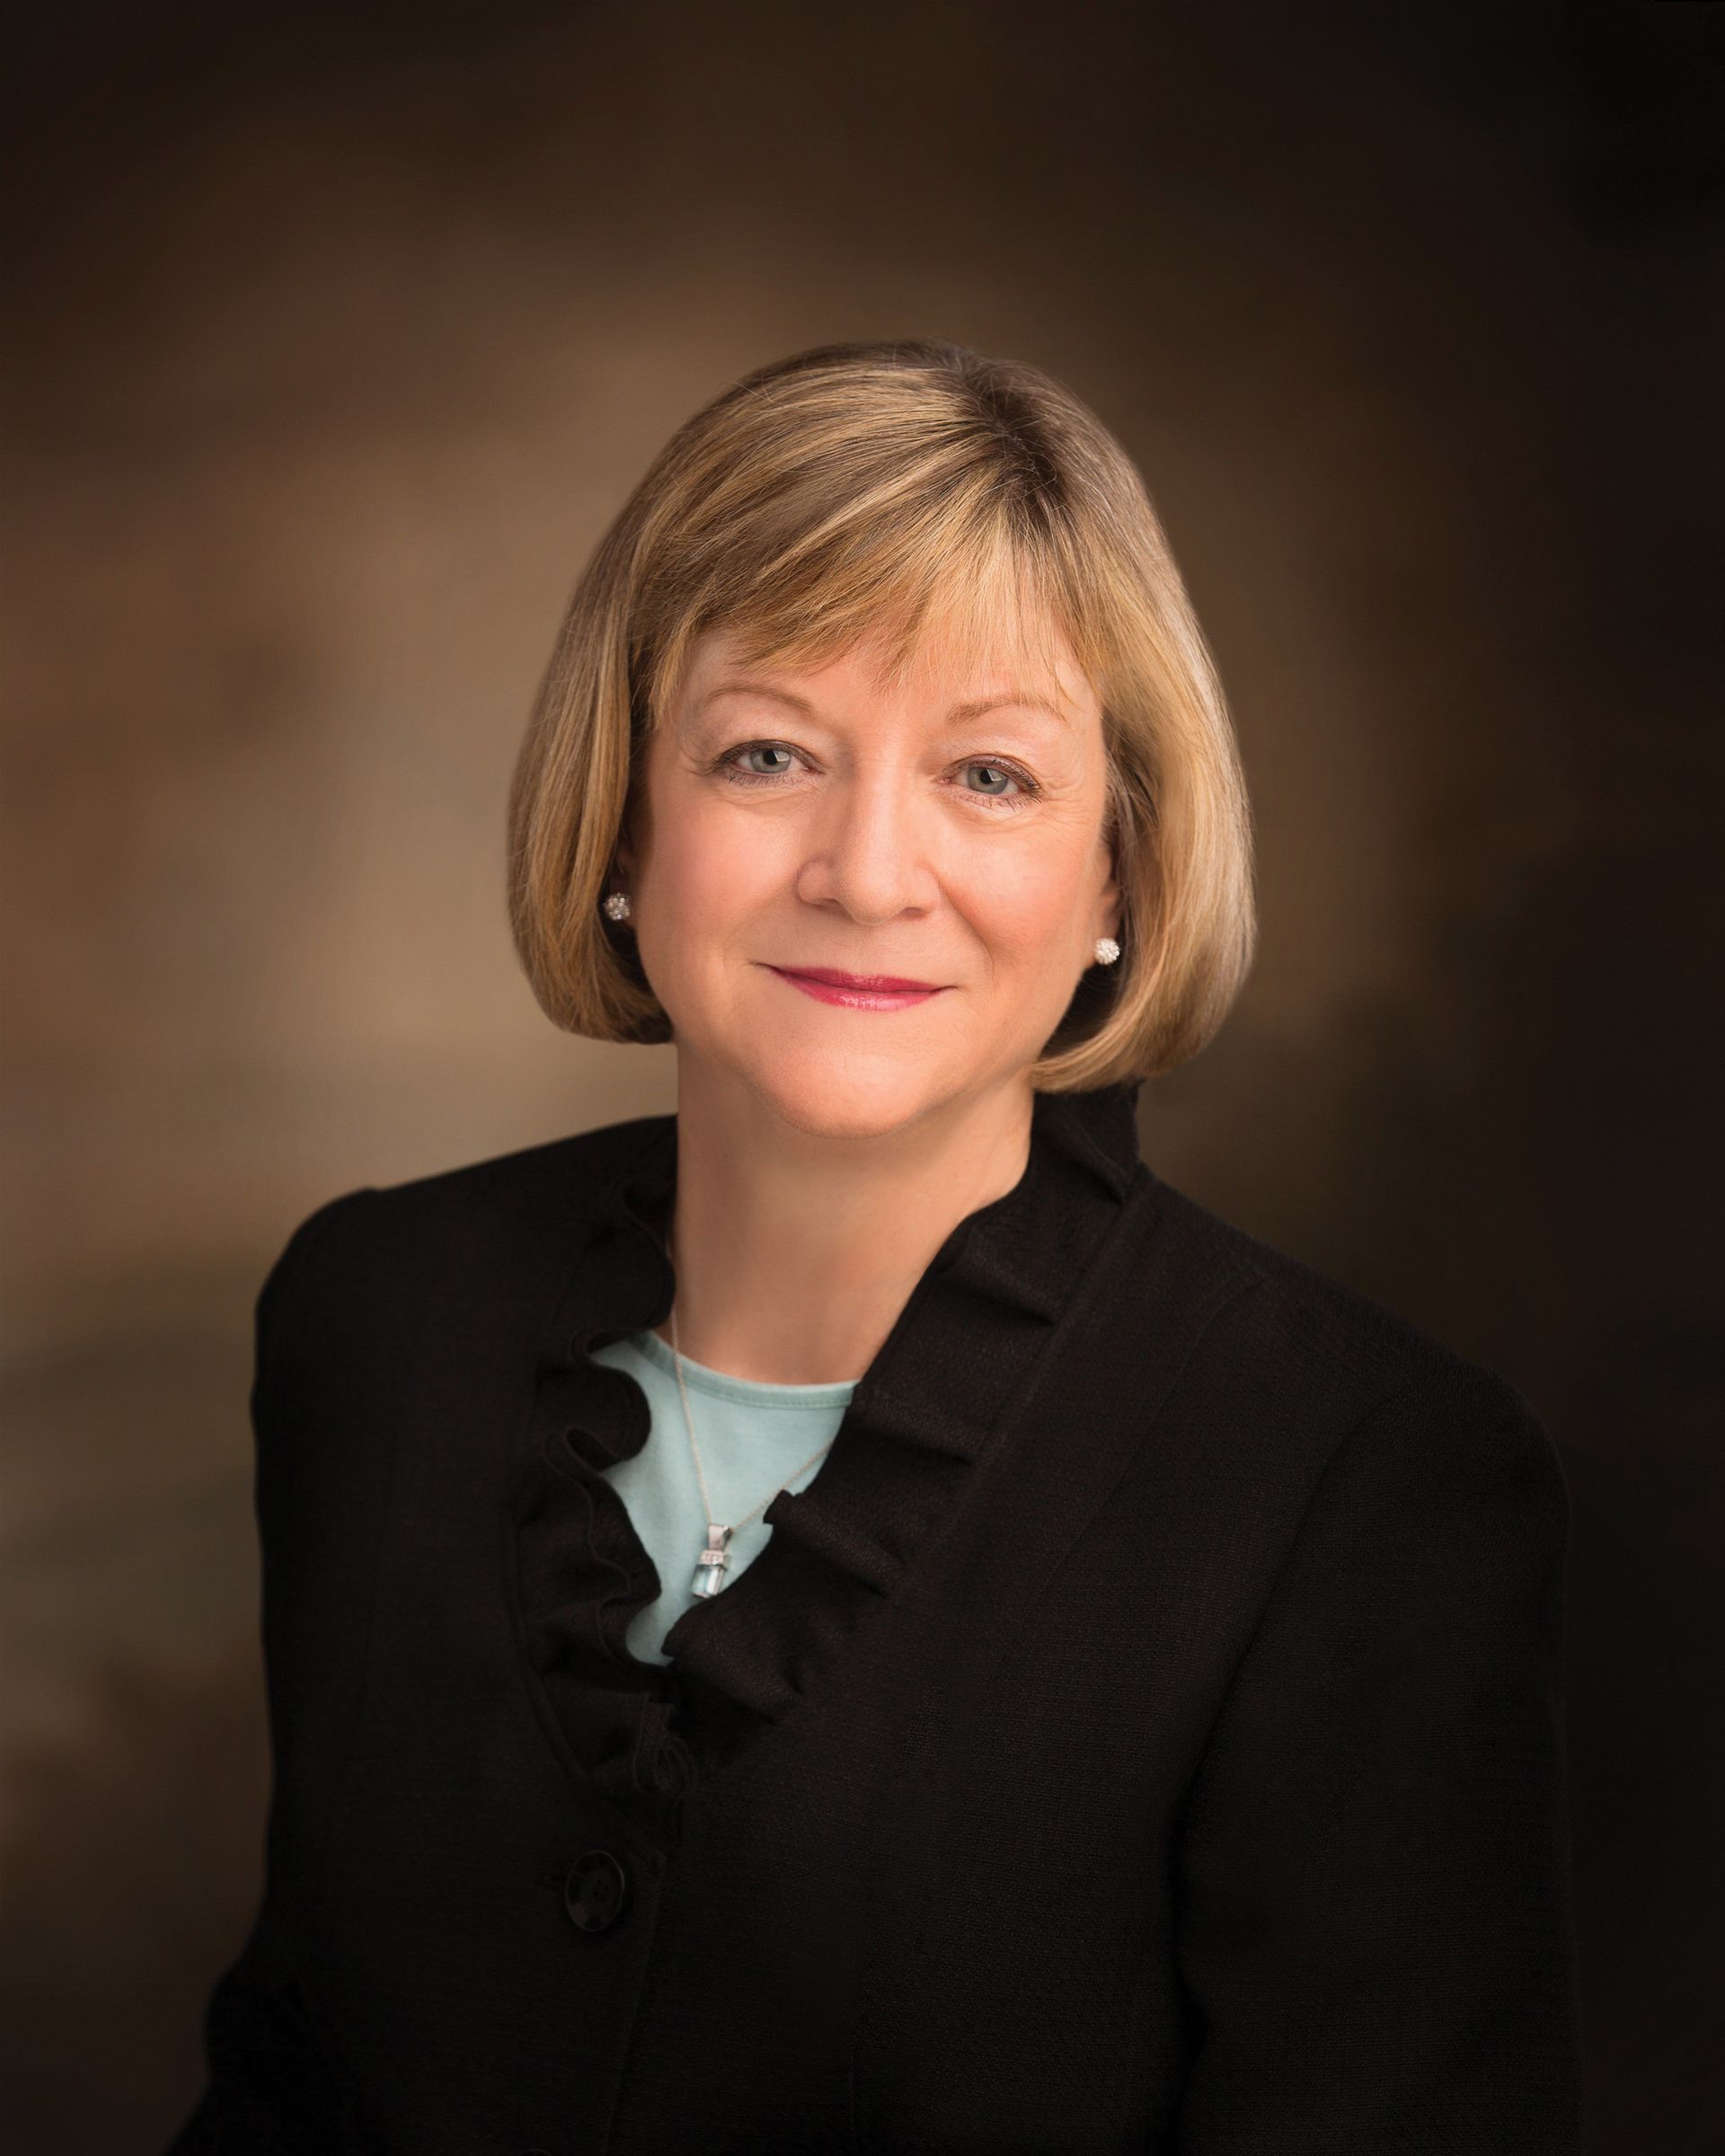 The official portrait of Bonnie L. Oscarson, who served as the 14th general president of the Young Women from 2013 to 2018.